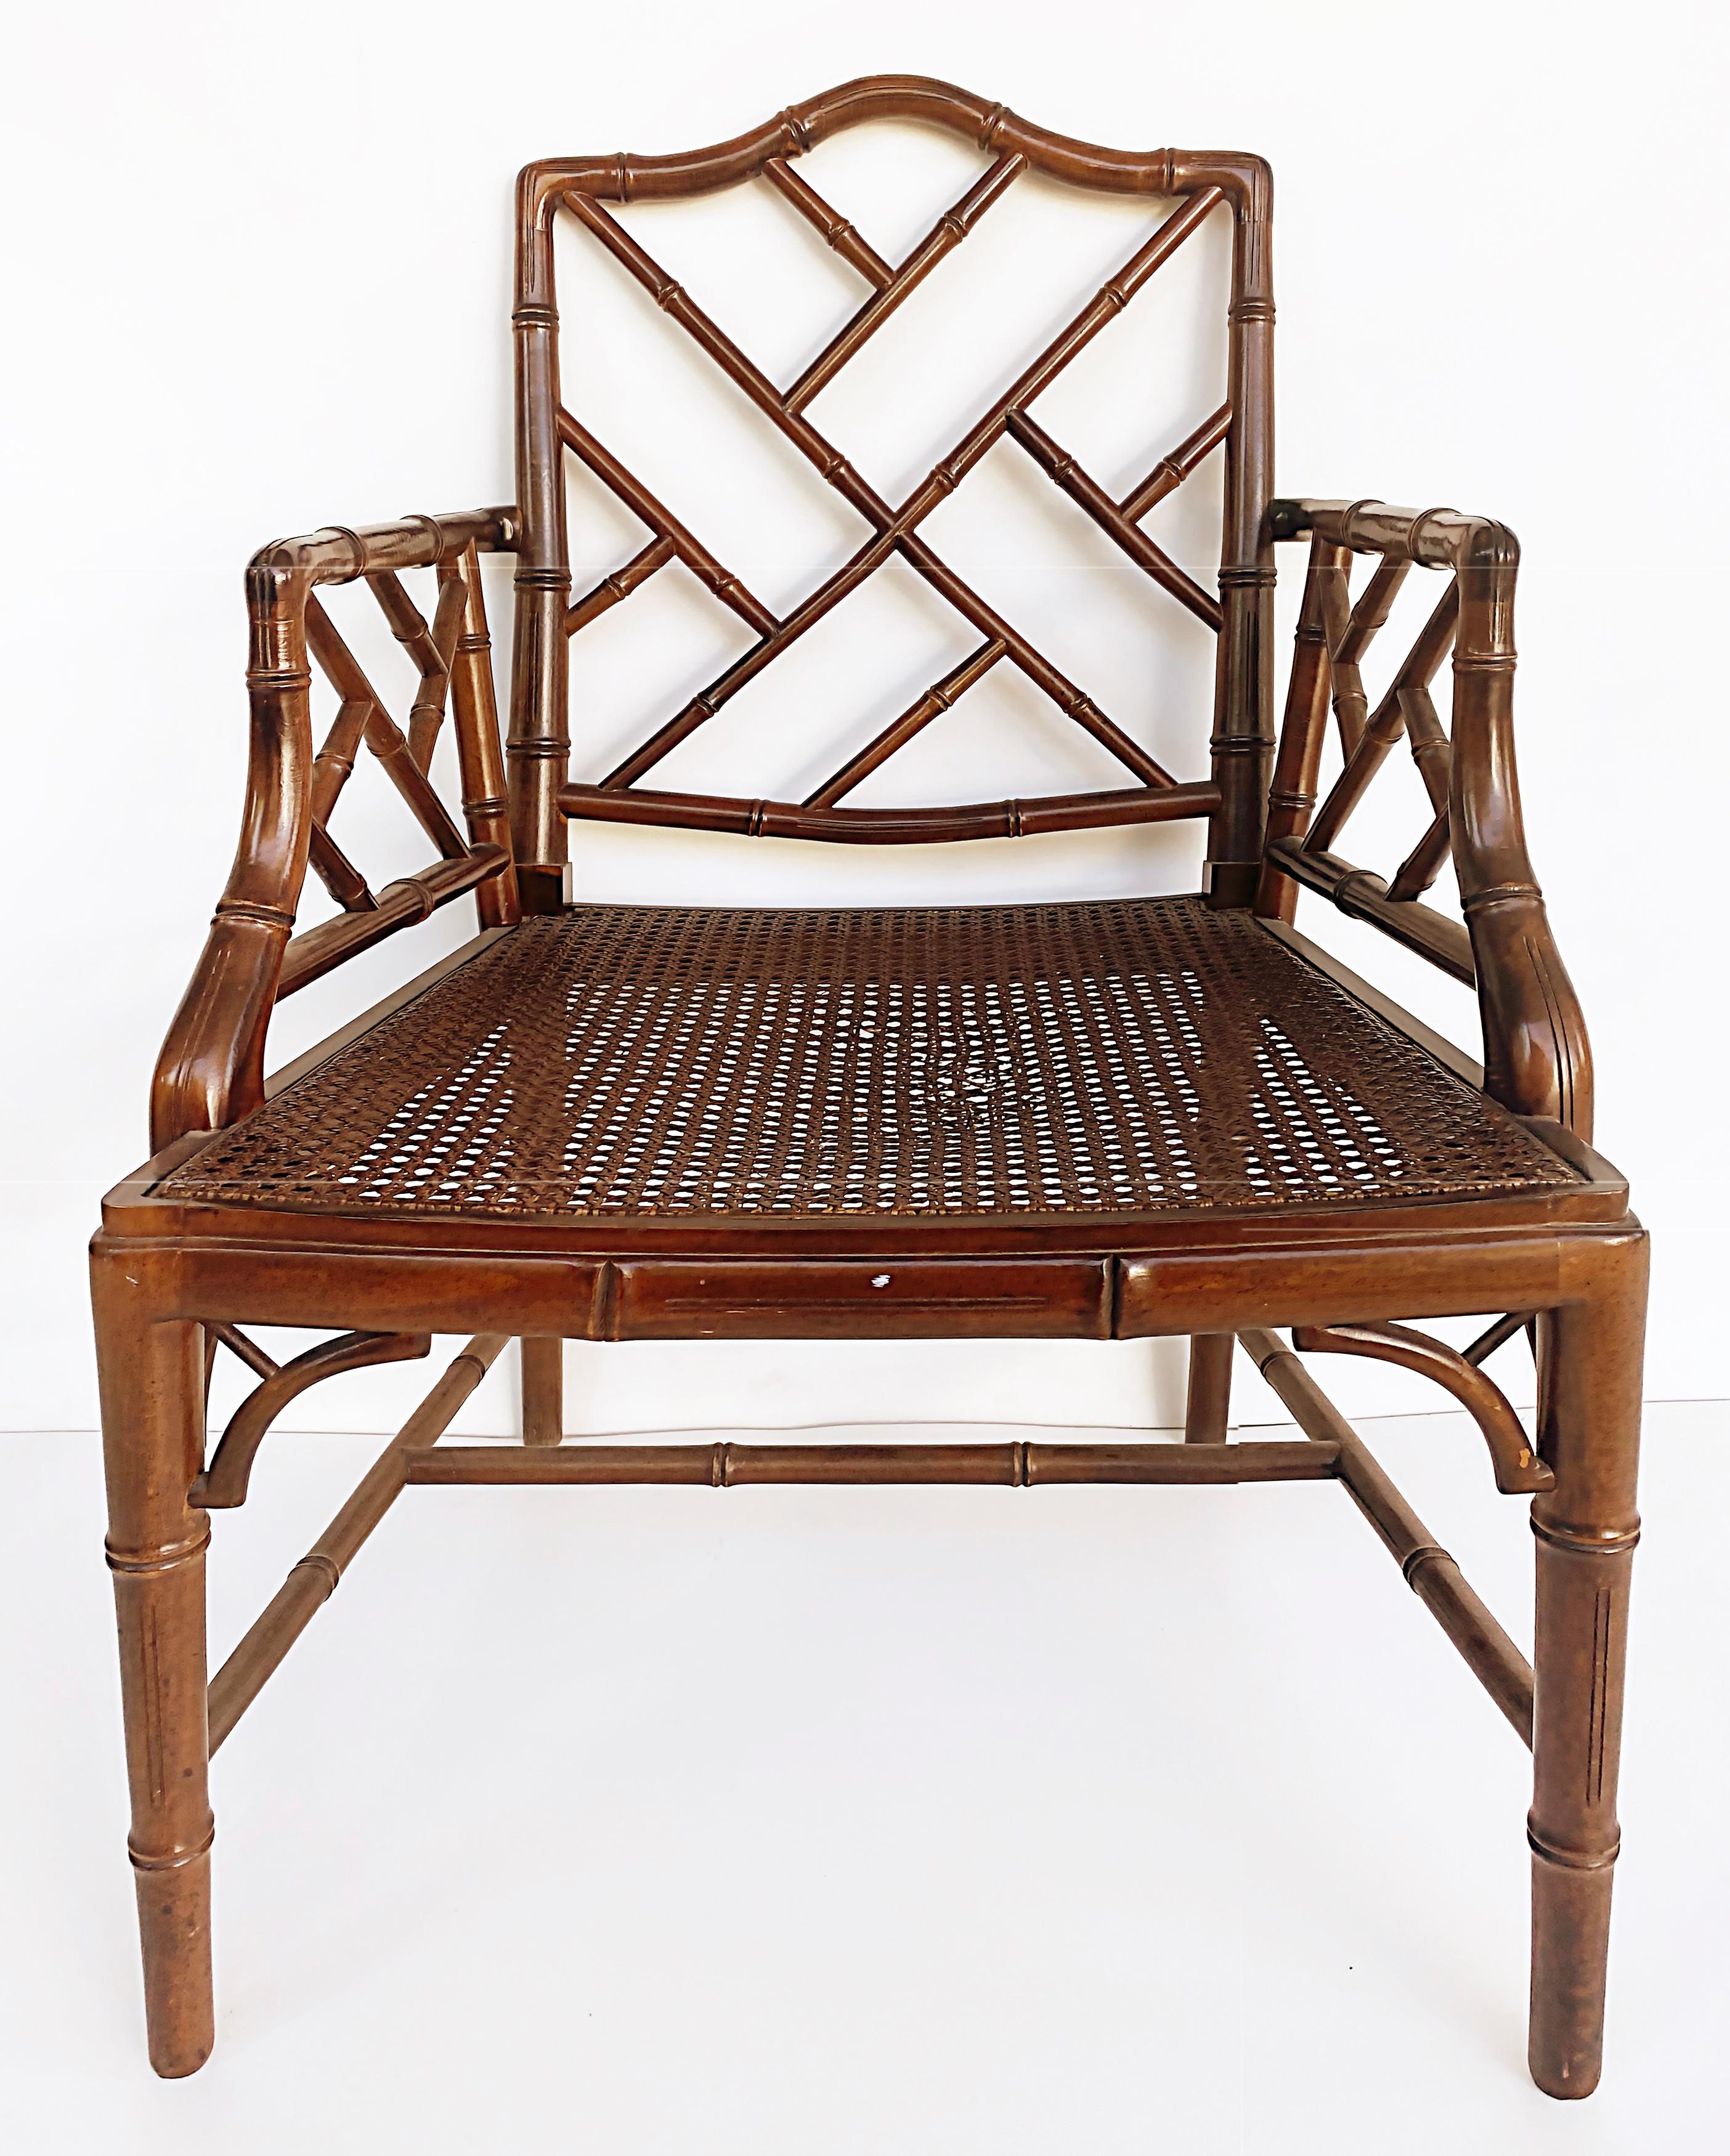 Chinese Chippendale Style Faux Bamboo Armchair, Caned Seat, Loose Seat Cushion For Sale 5